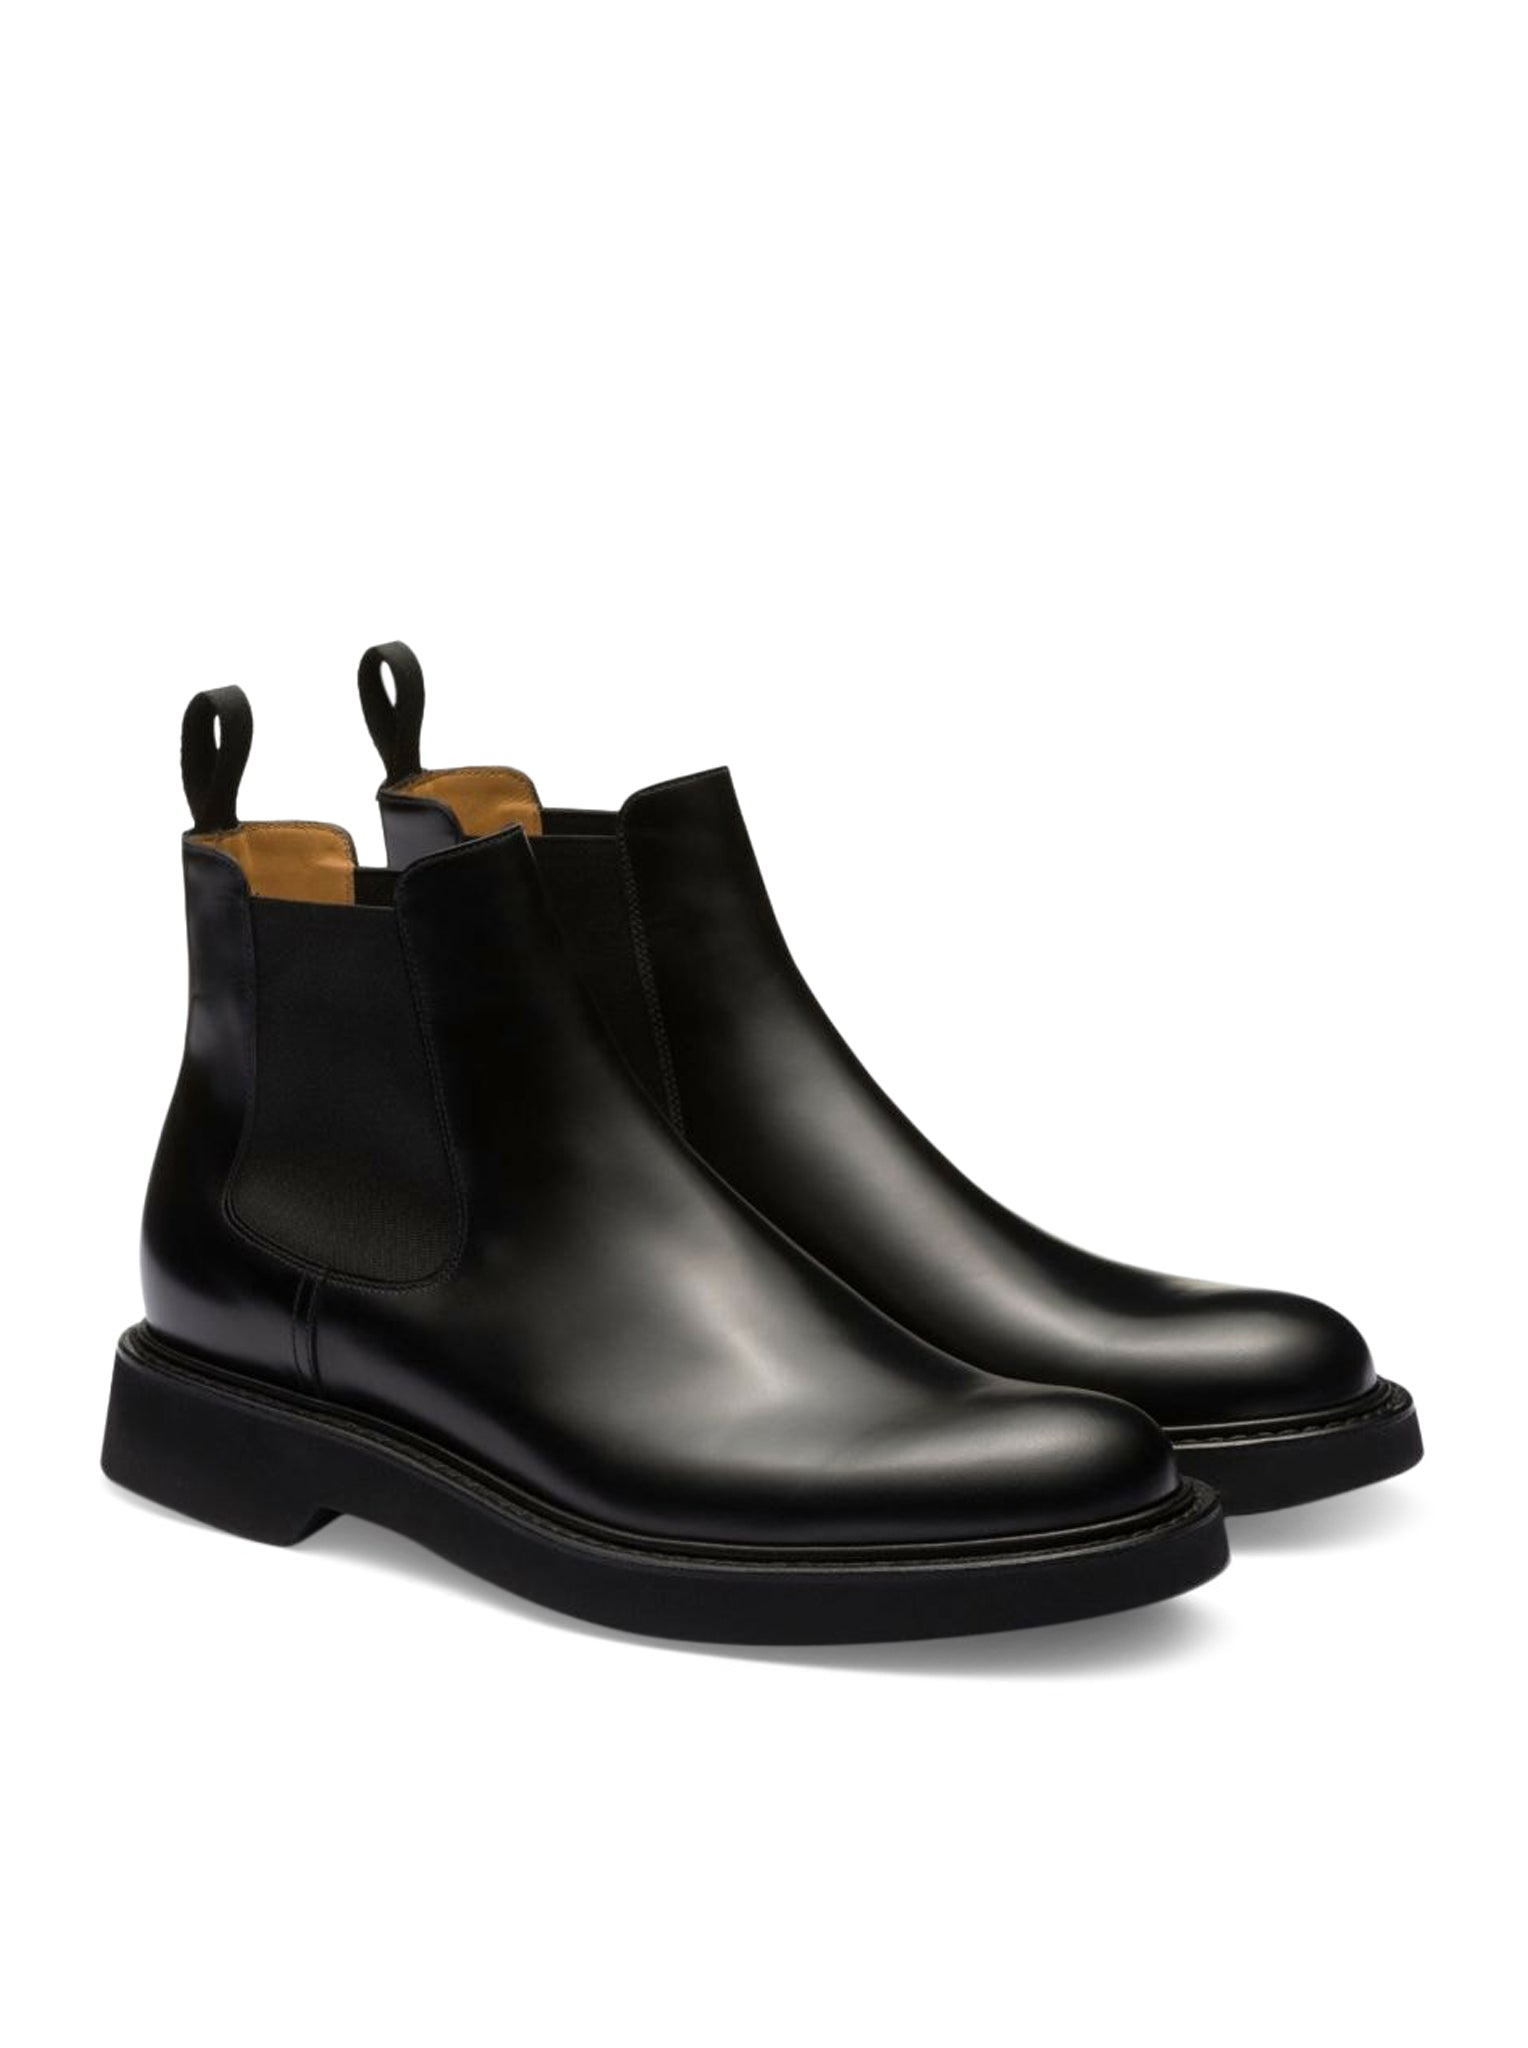 Goodward R Lw leather Chelsea boots